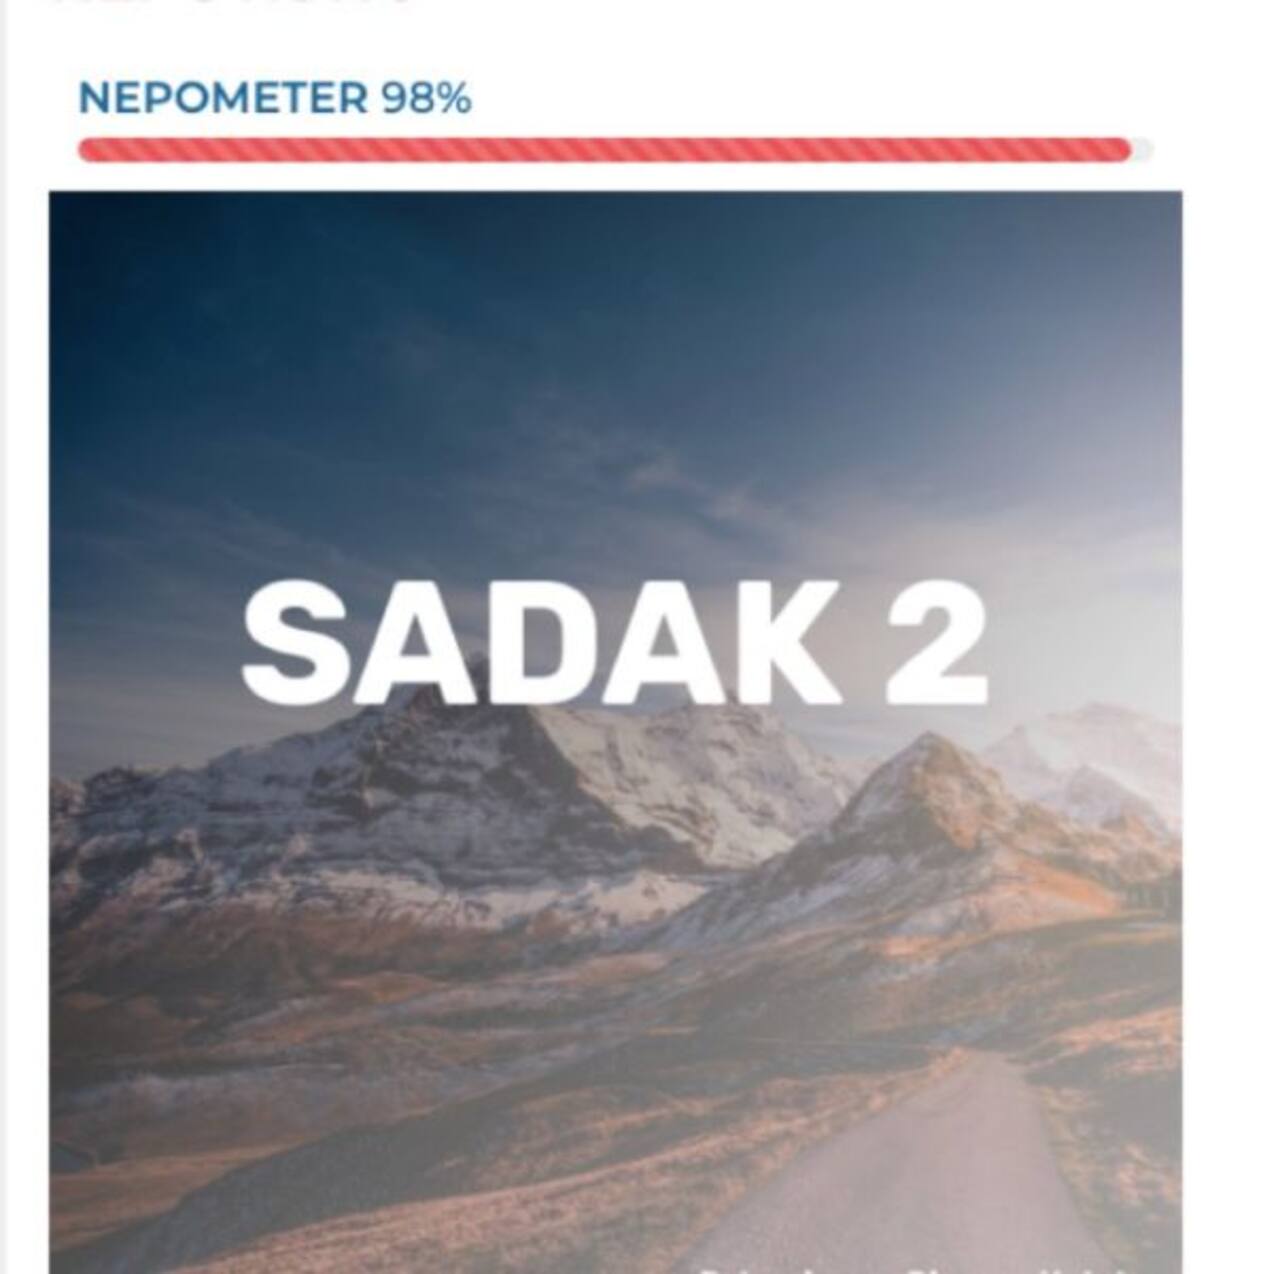 Sushant Singh Rajput's family rates Sadak 2 as 98% nepotistic on their newly launched 'Nepometer' app